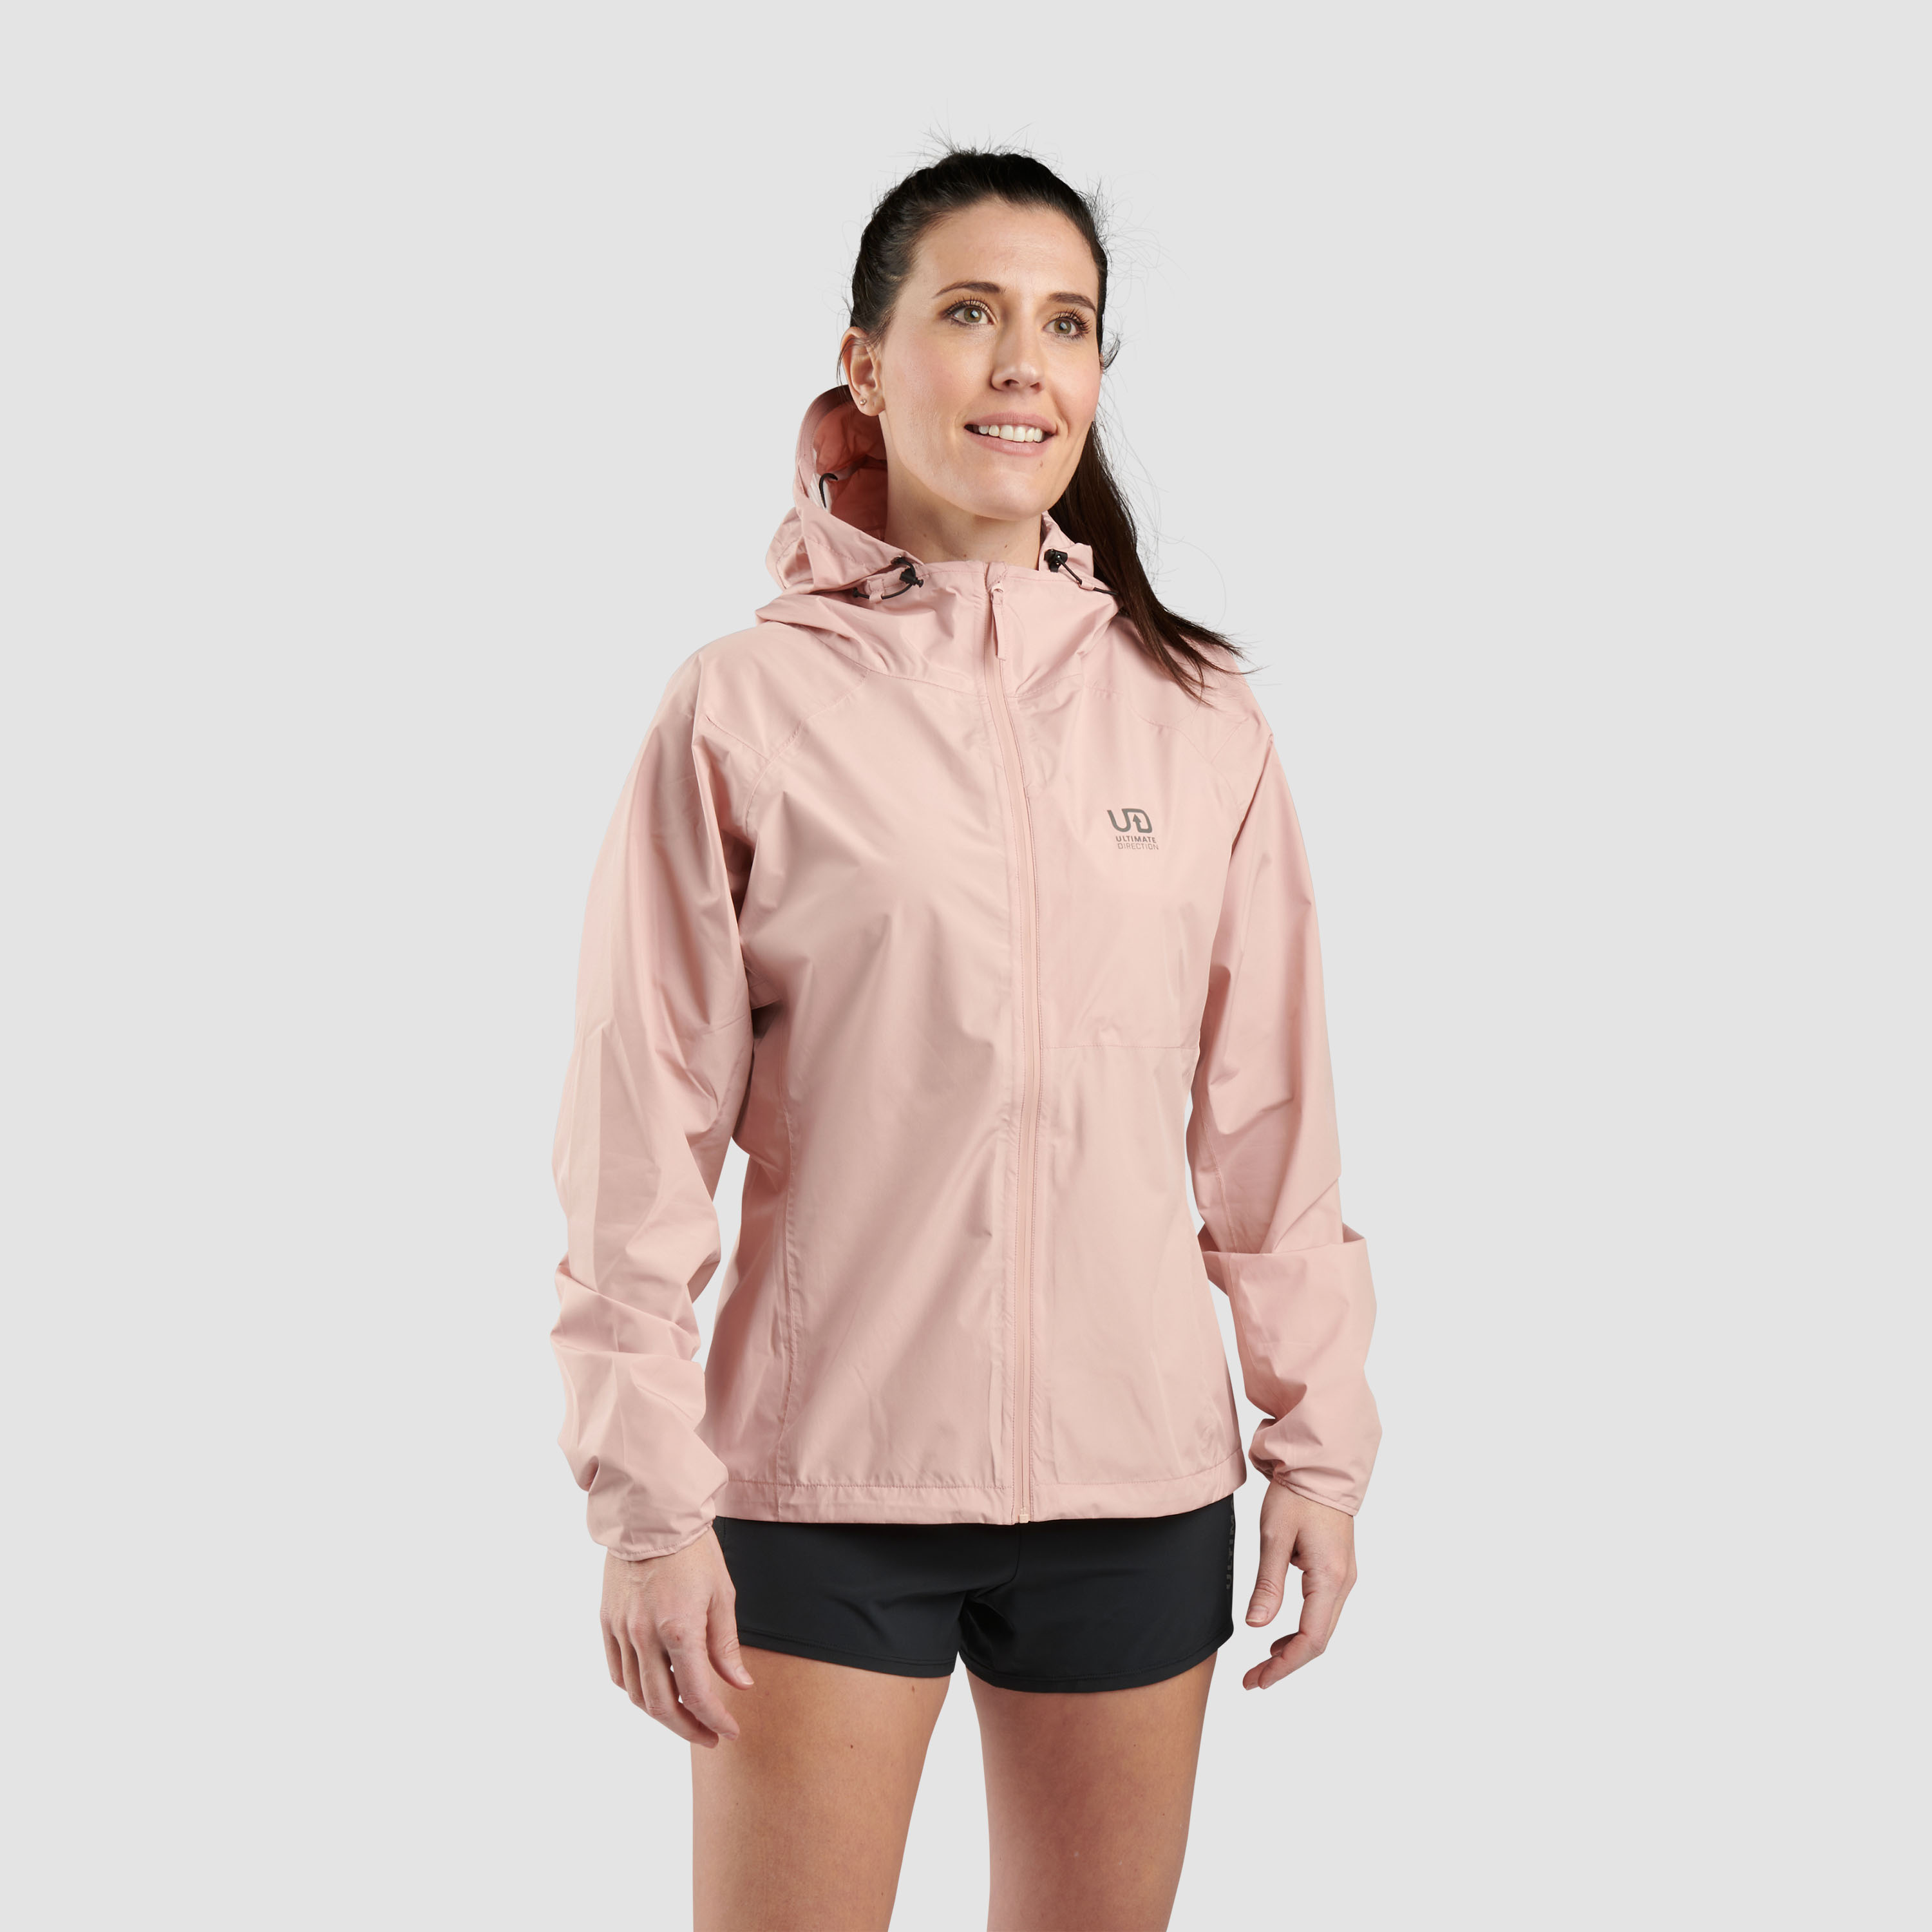 Image Ultimate Direction Deluge Jacket Women CLAY M